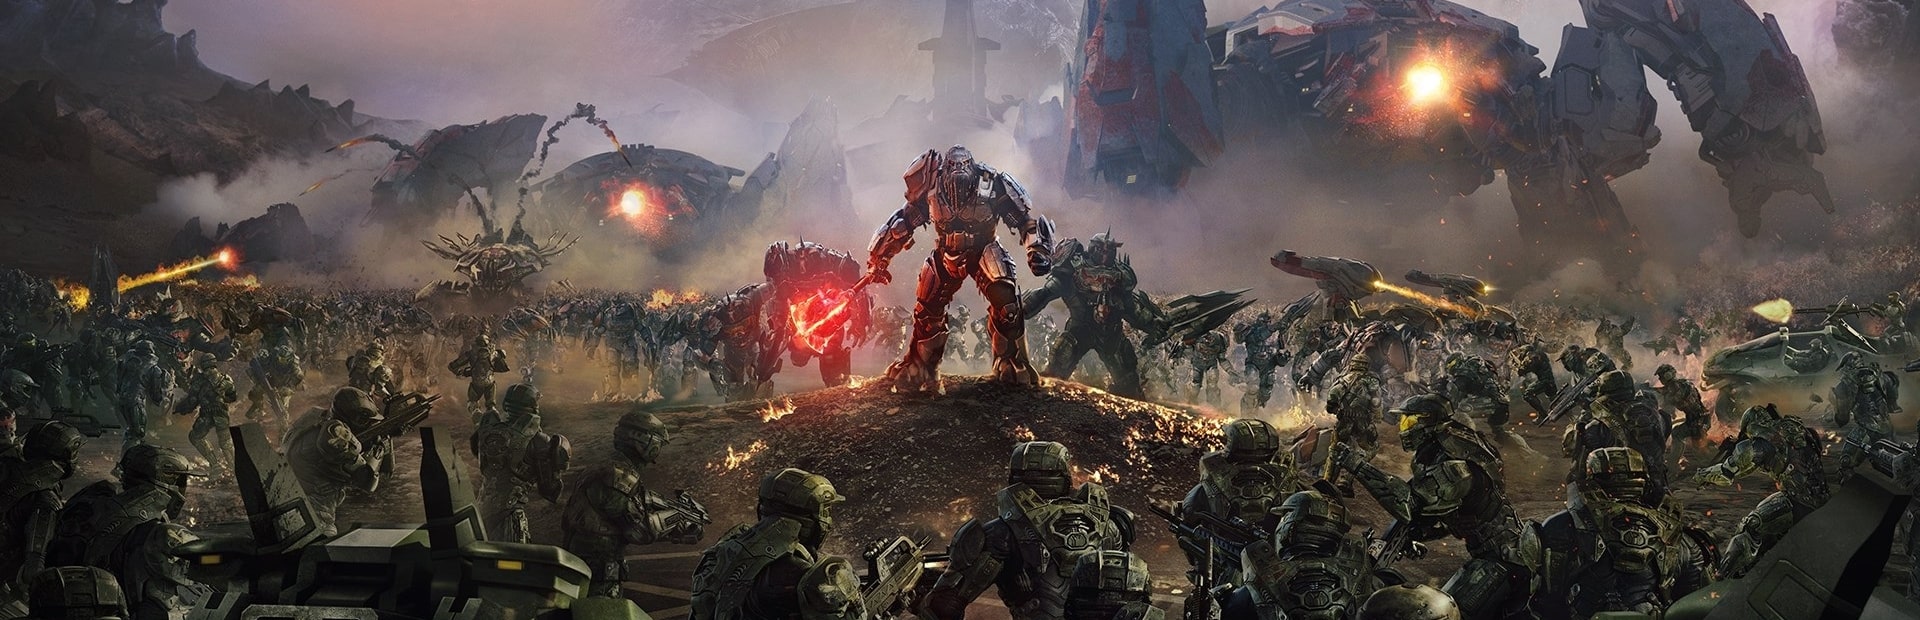 Halo Wars 2 Review - Unexpected Sequel?